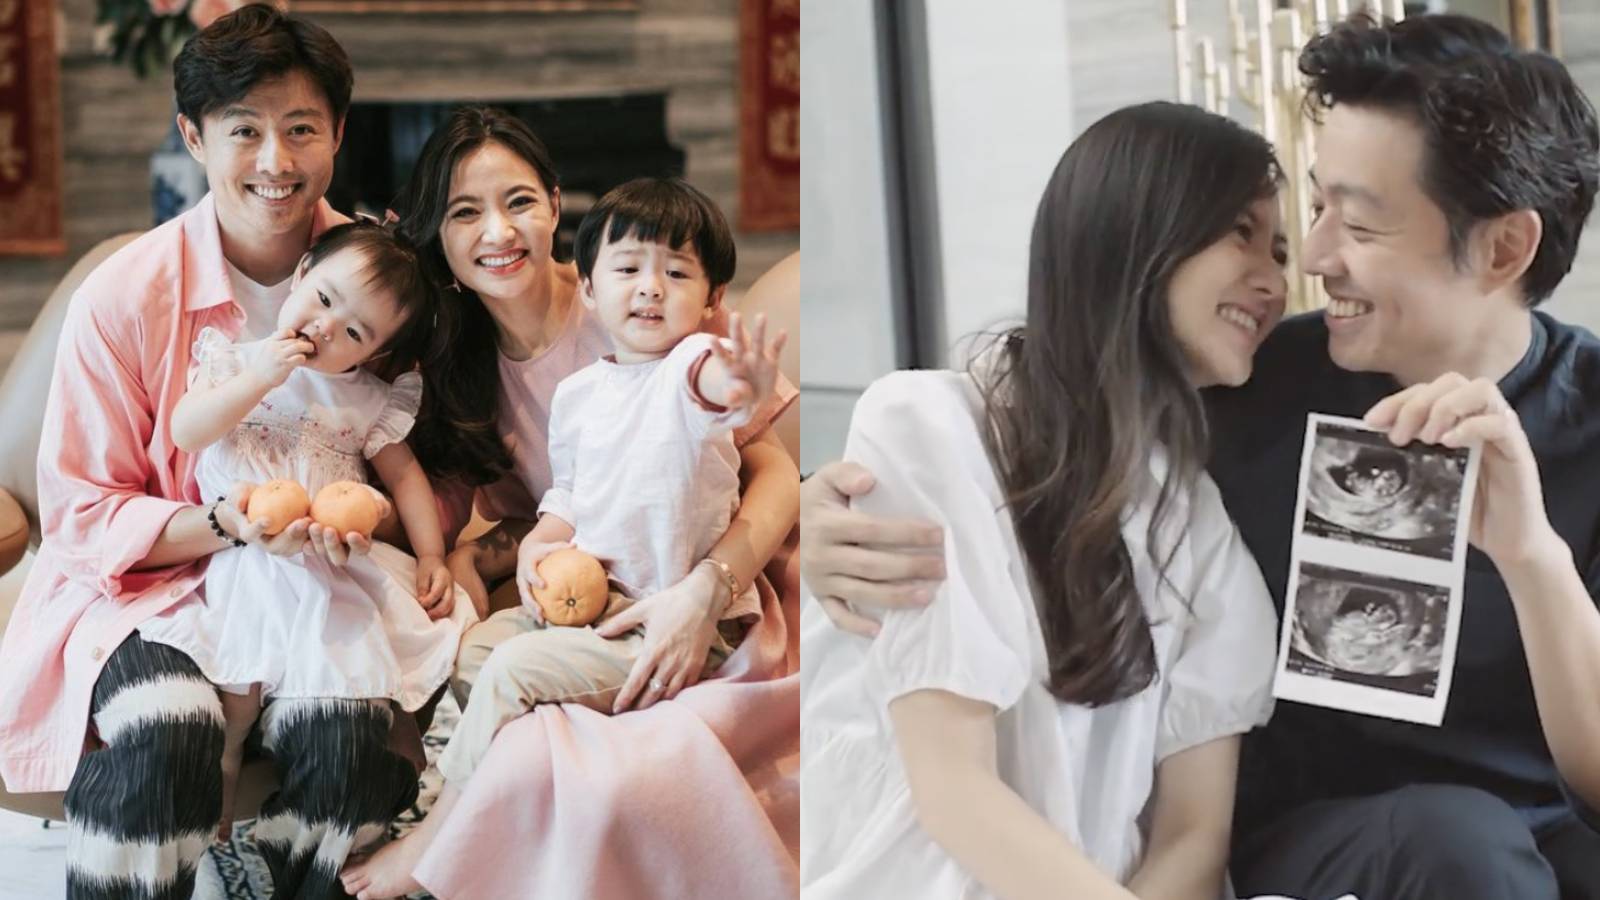 Cheryl Wee Just Announced That She’s Pregnant With Her 3rd Child In This Adorable Video